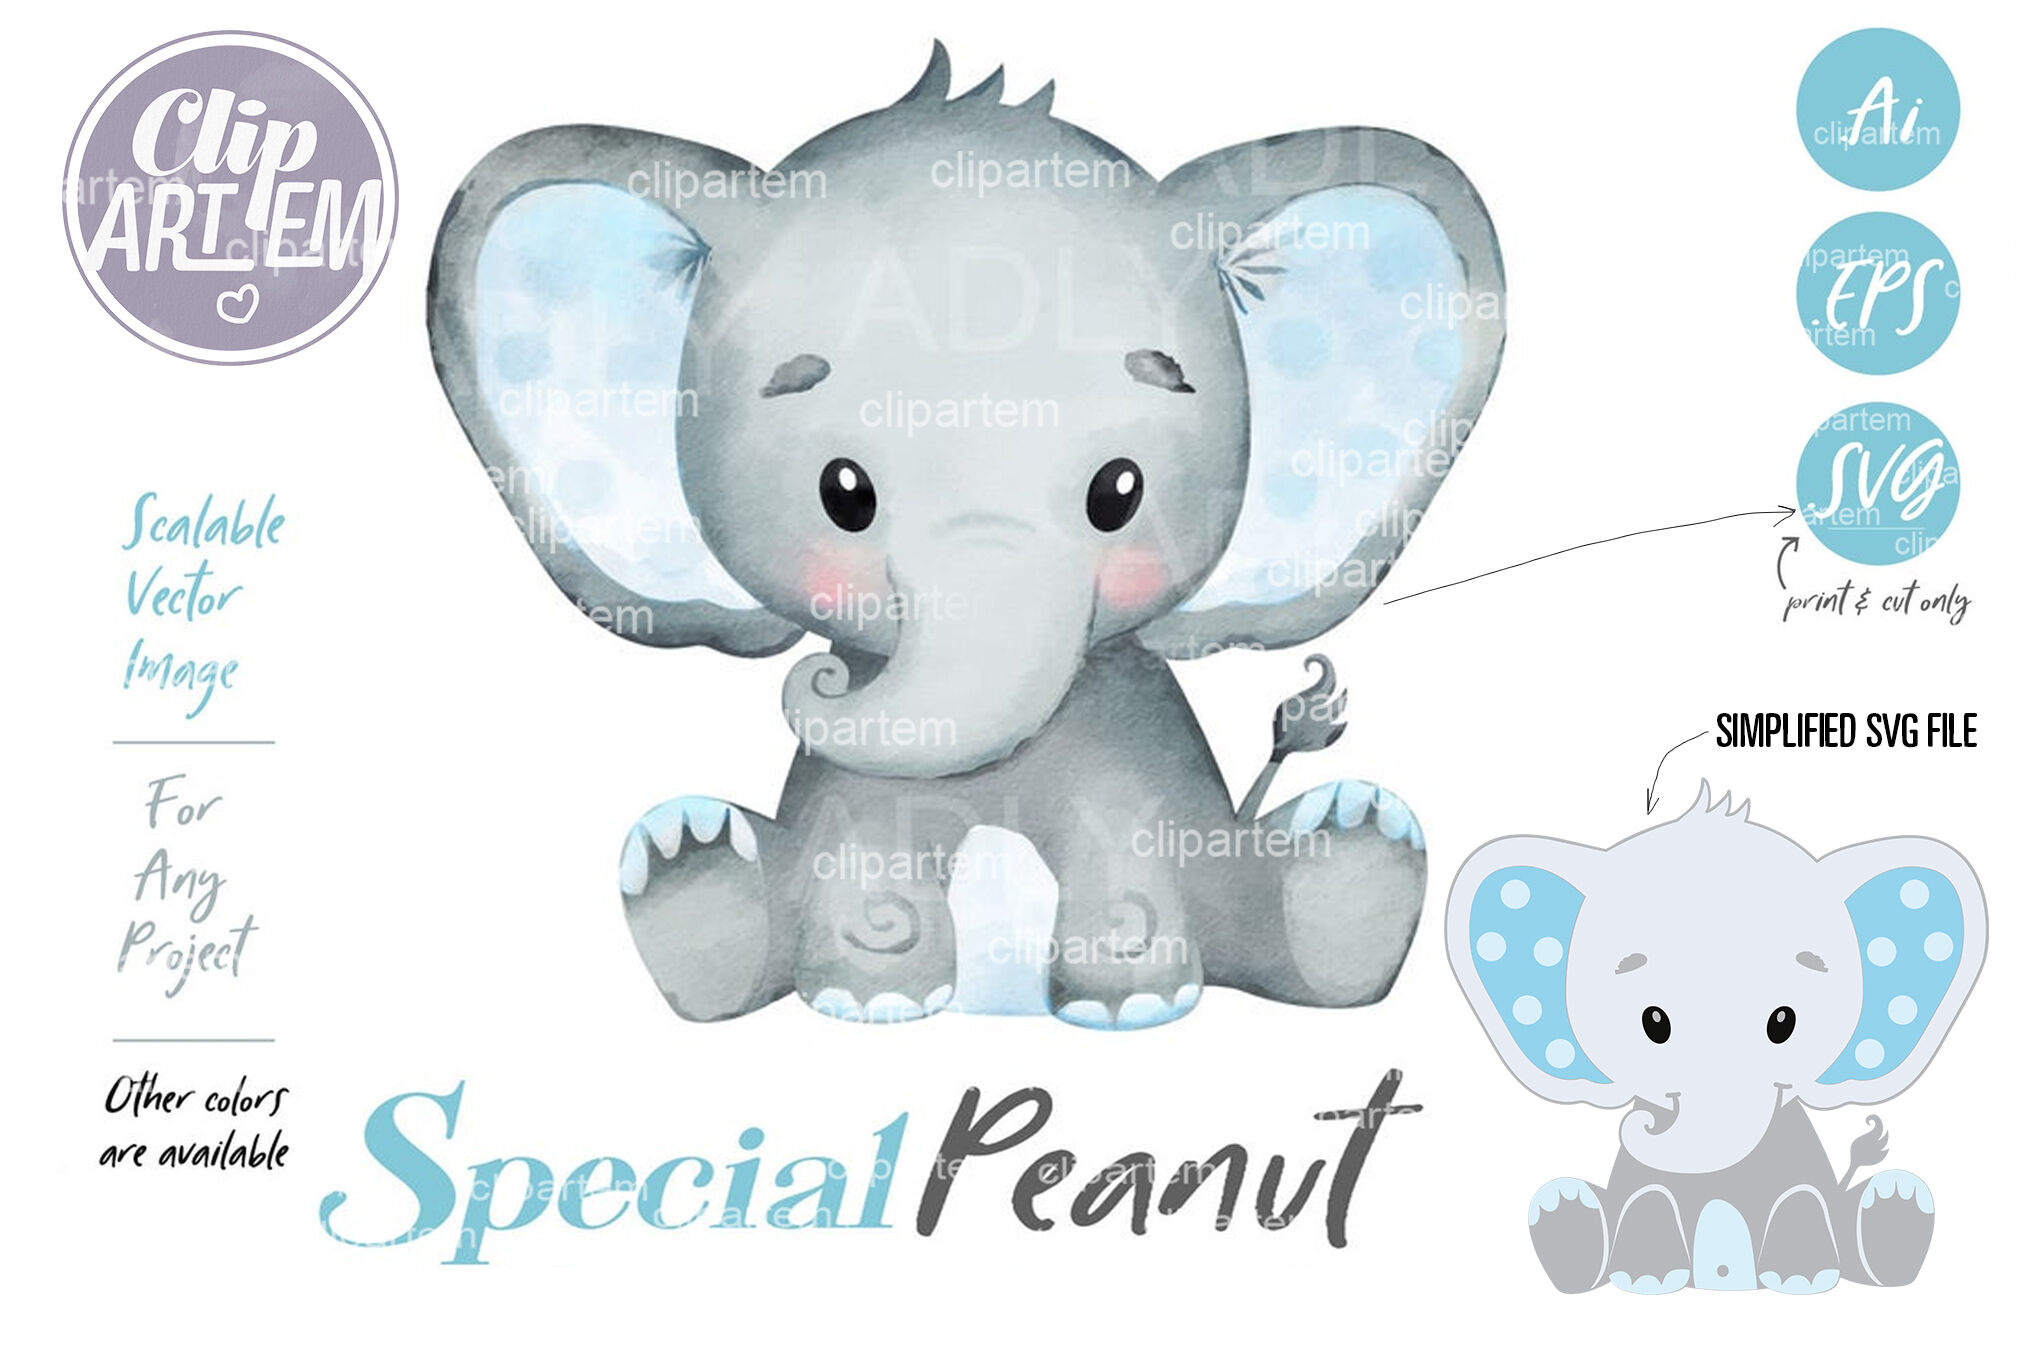 Special Peanut Blue Boy Elephant Svg Vector Watercolor Images By Clipartem Thehungryjpeg Com